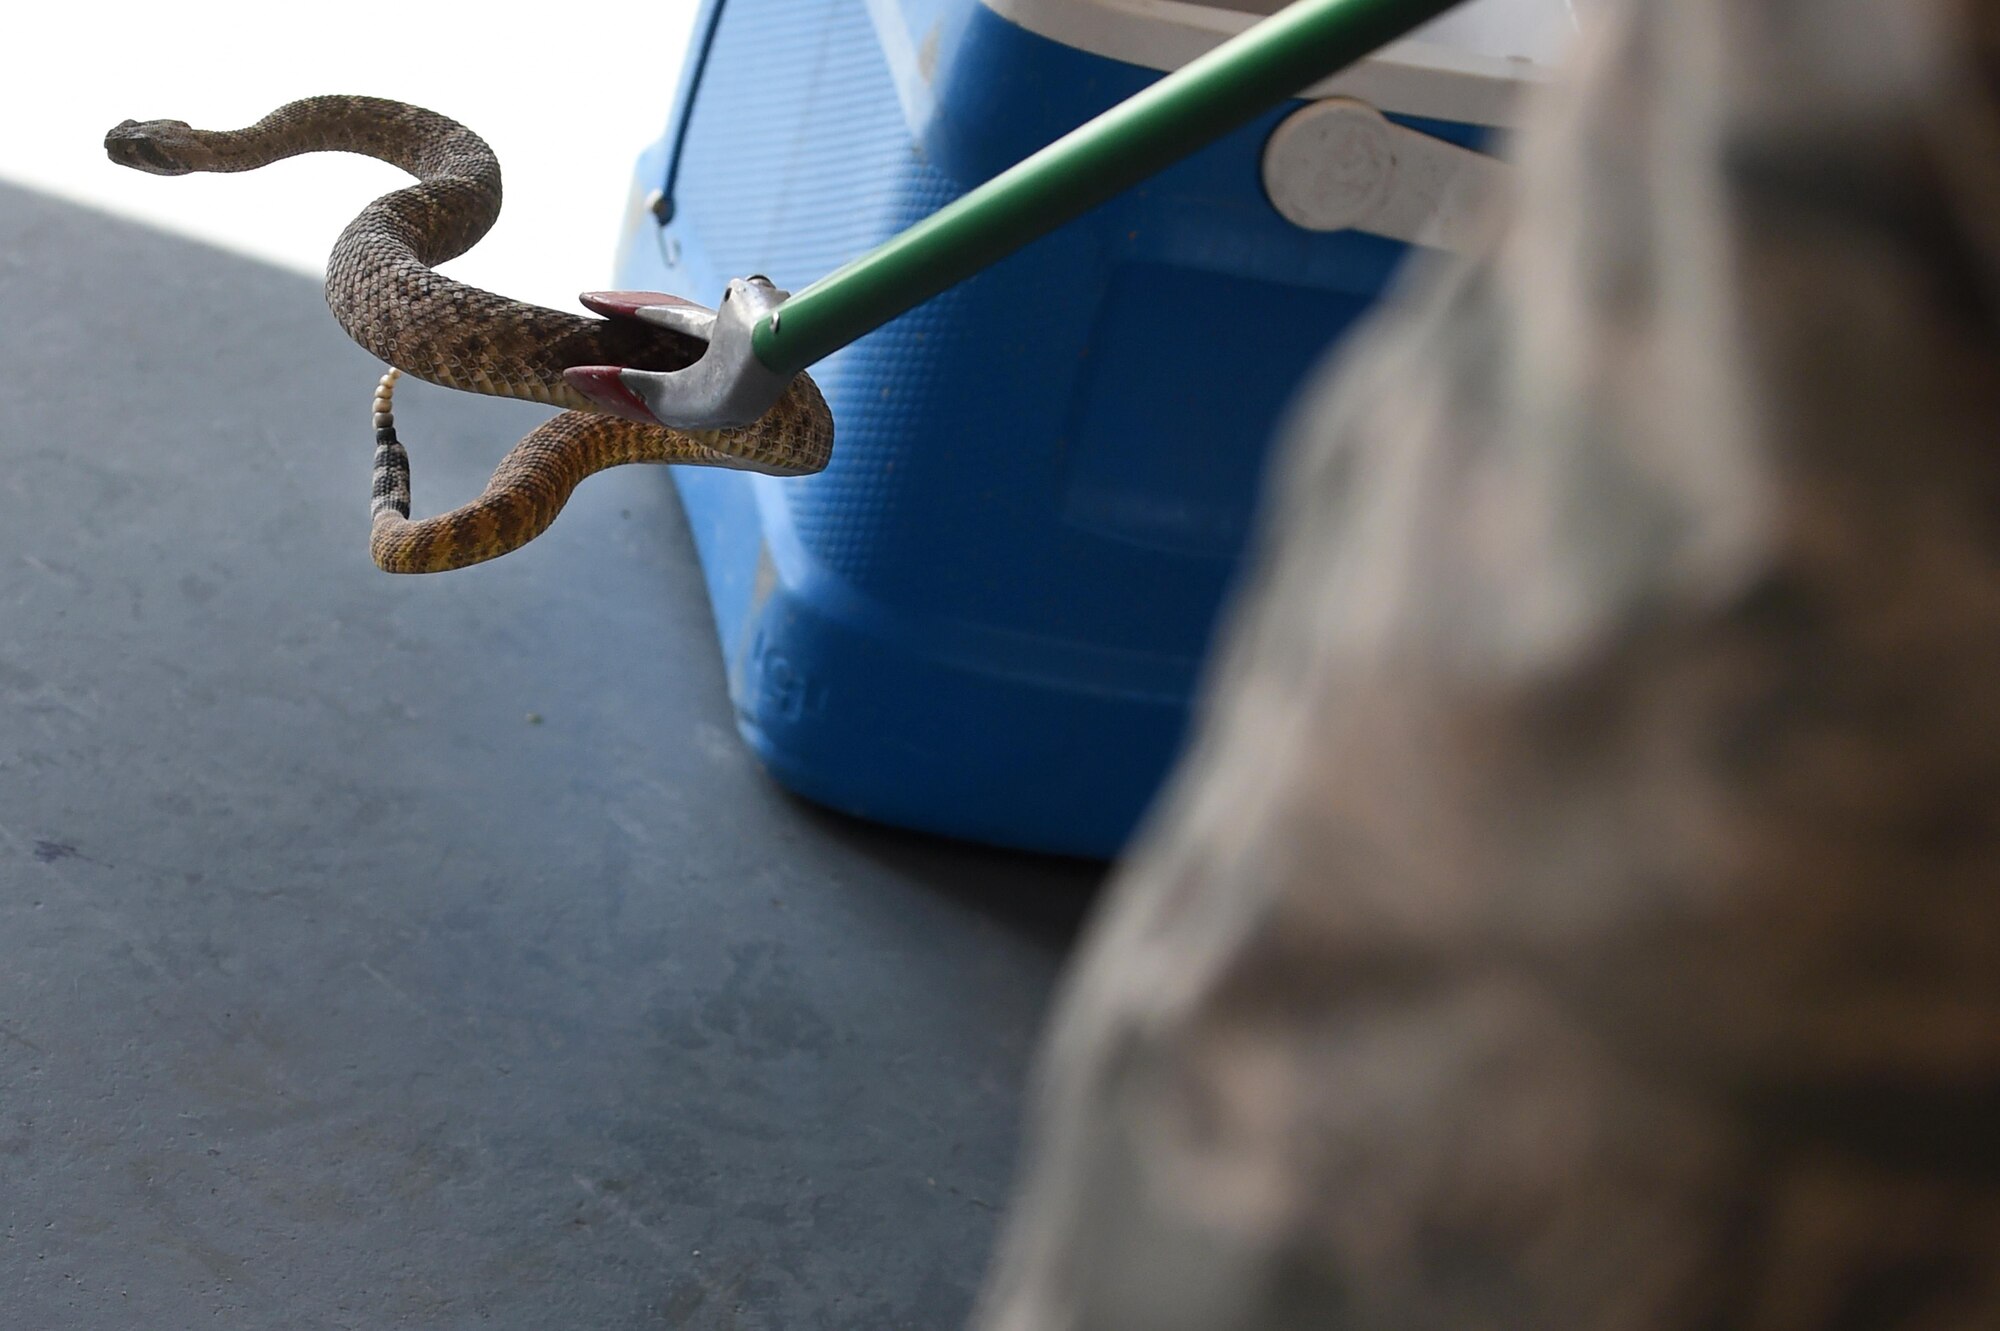 Airman 1st Class James, a 49th Civil Engineer Squadron pest management specialist, handles a venomous rattlesnake with tongs at Holloman Air Force Base, N.M., on July 6. Upon arrival at Holloman, pest management personnel complete rattlesnake training to master the proper techniques of using special tools to capture and subsequently release a snake. (Last names are being withheld due to operational requirements. U.S. Air Force photo by Staff Sgt. Eboni Prince)